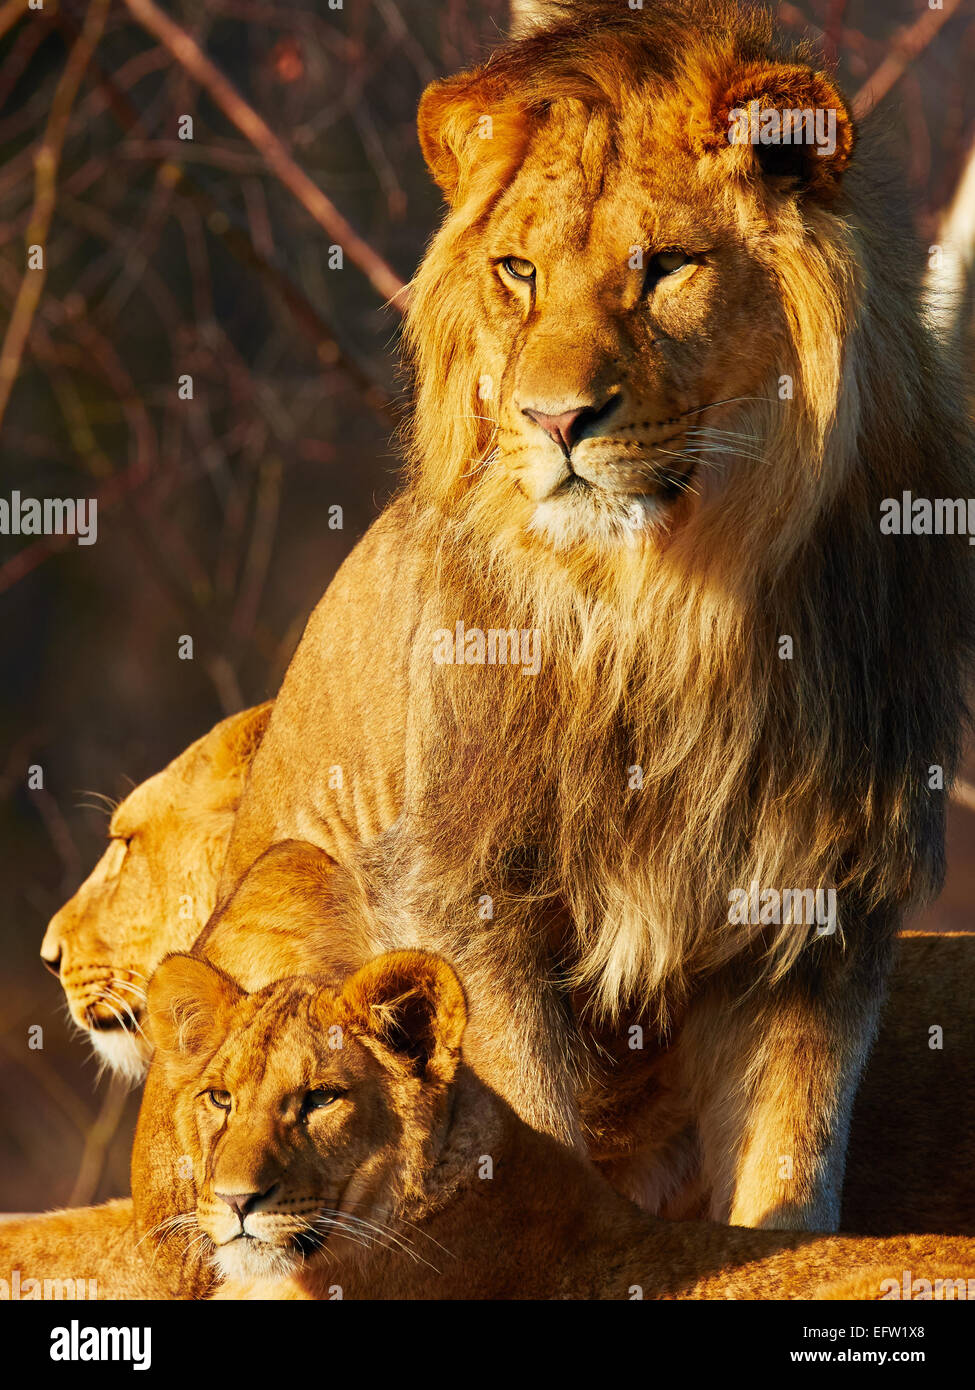 Three lions close together in a forest Stock Photo